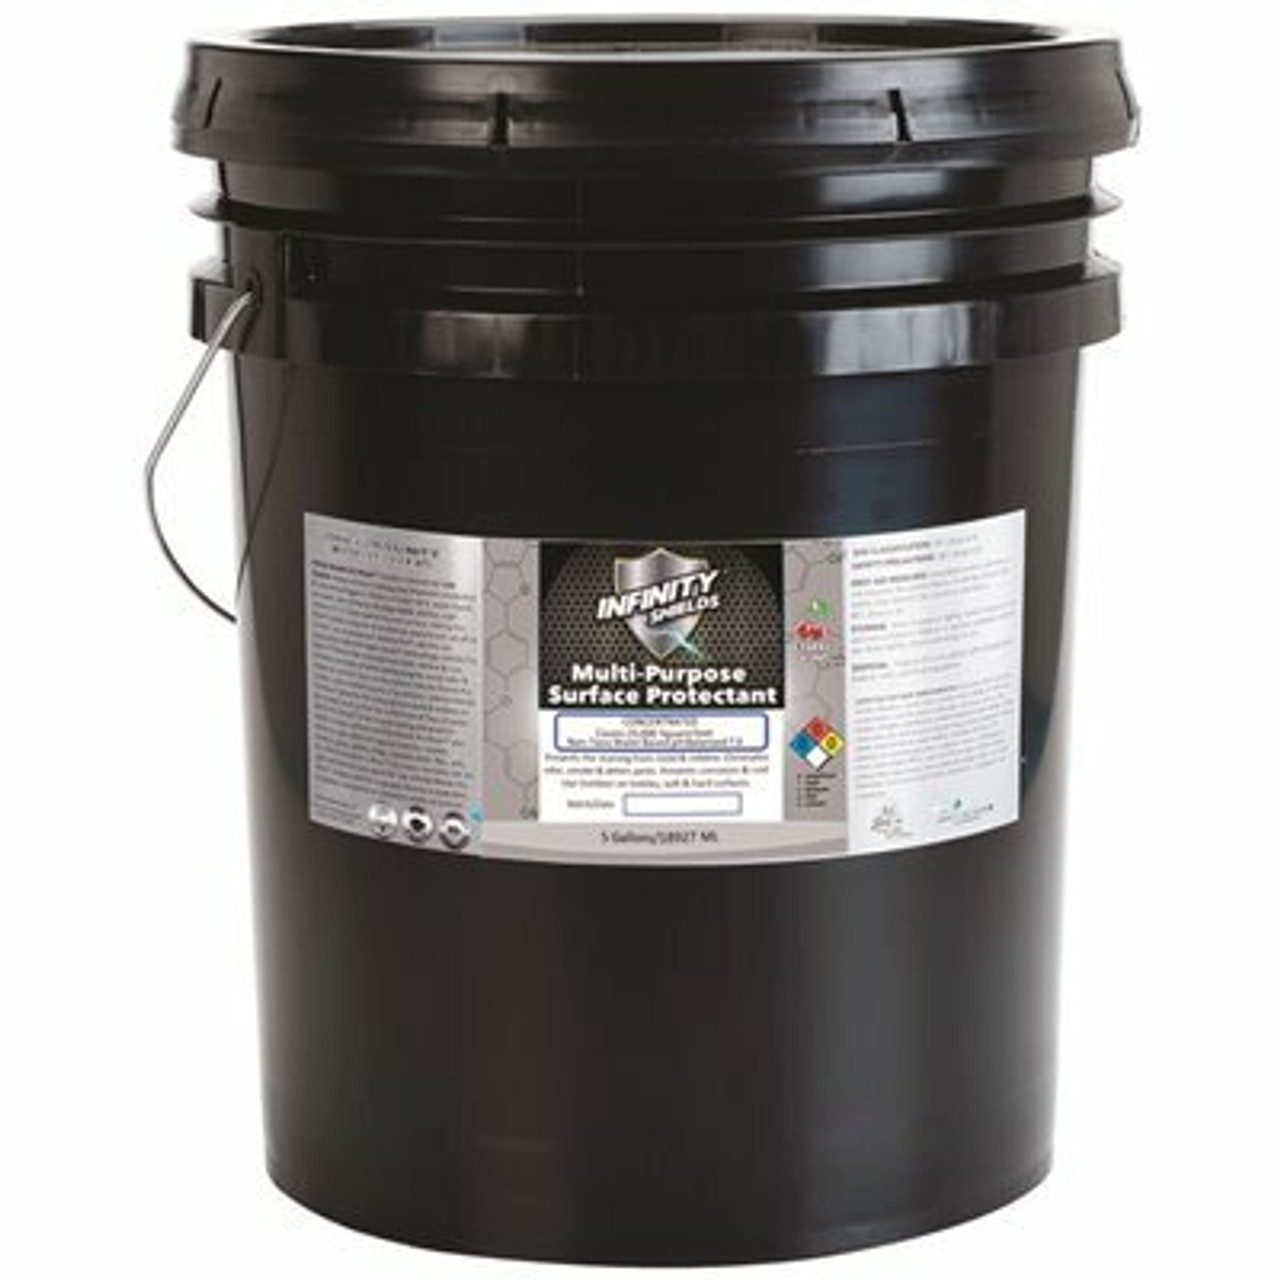 Infinity Shields 5 Gal. Mold And Mildew Long Term Control Blocks And Prevents Staining (Cherry) Concentrate